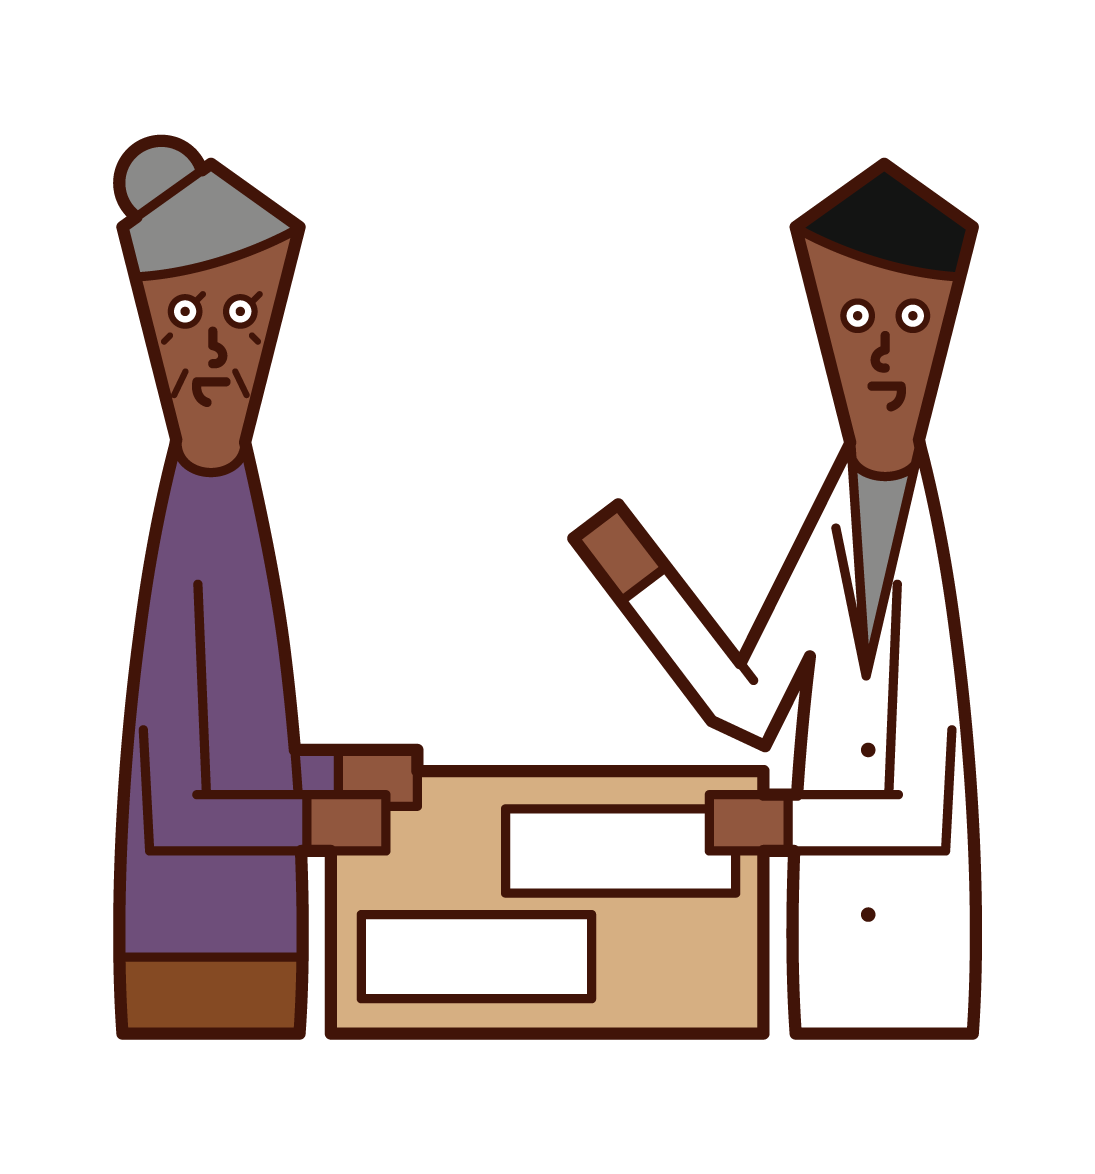 Illustration of a pharmacist (male) working in a pharmacy